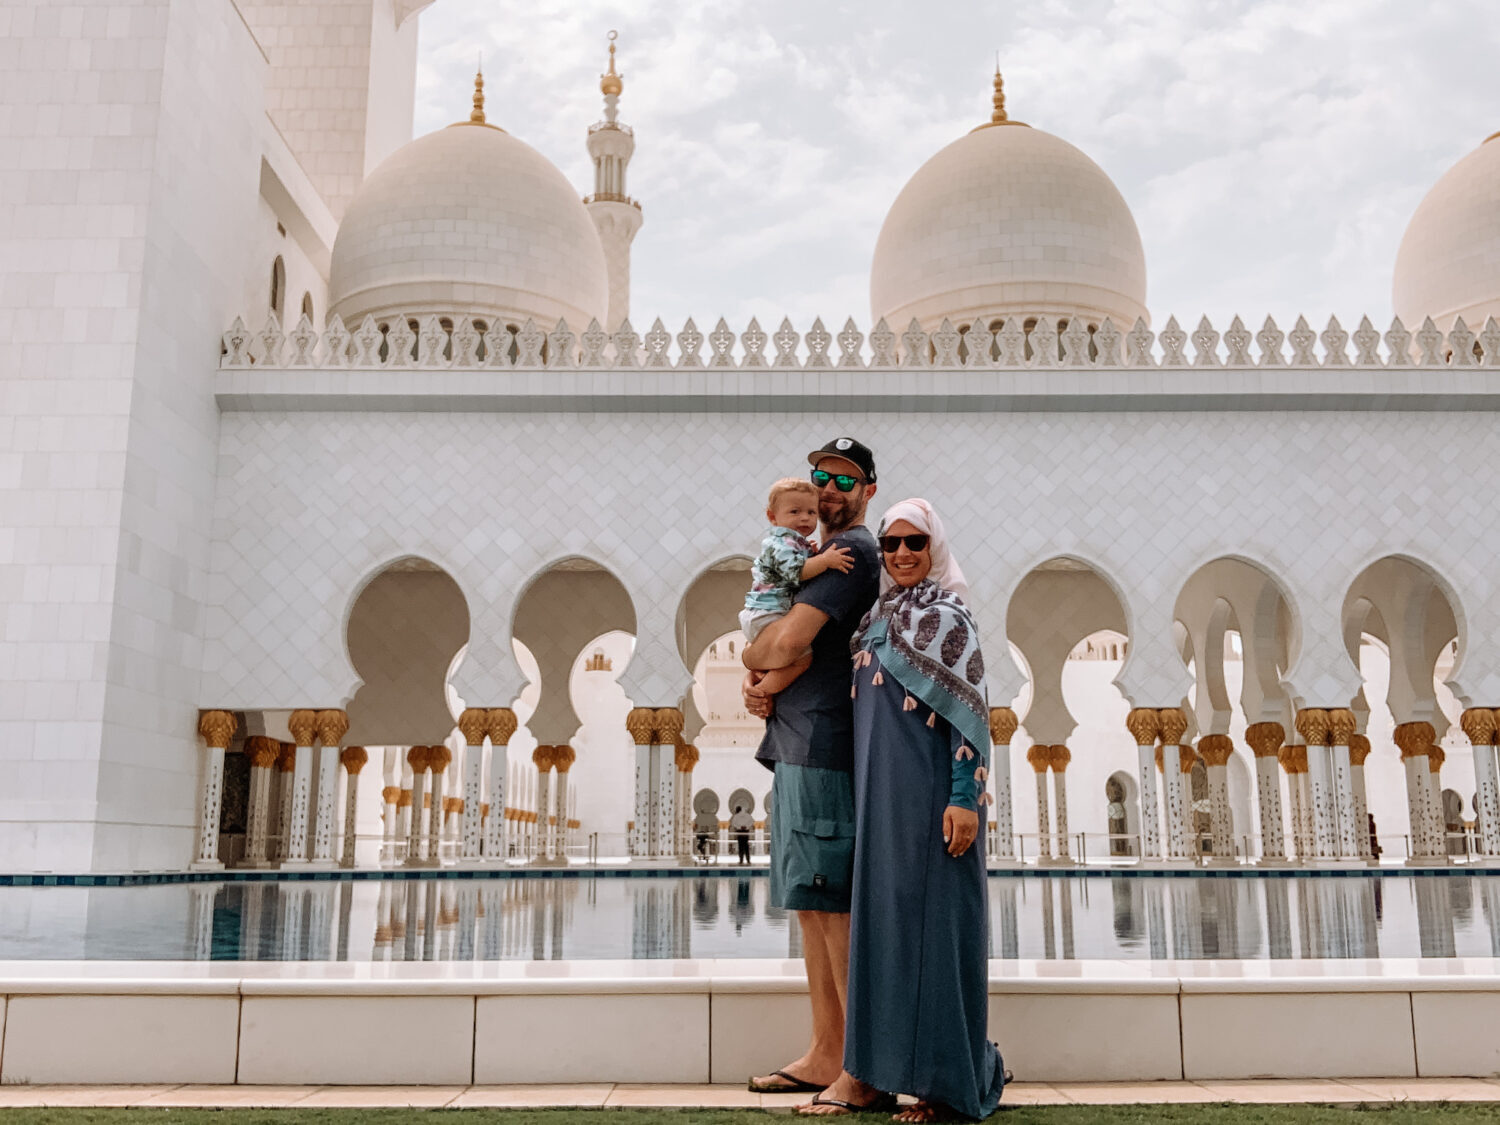 THINGS TO DO IN ABU DHABI WITH KIDS